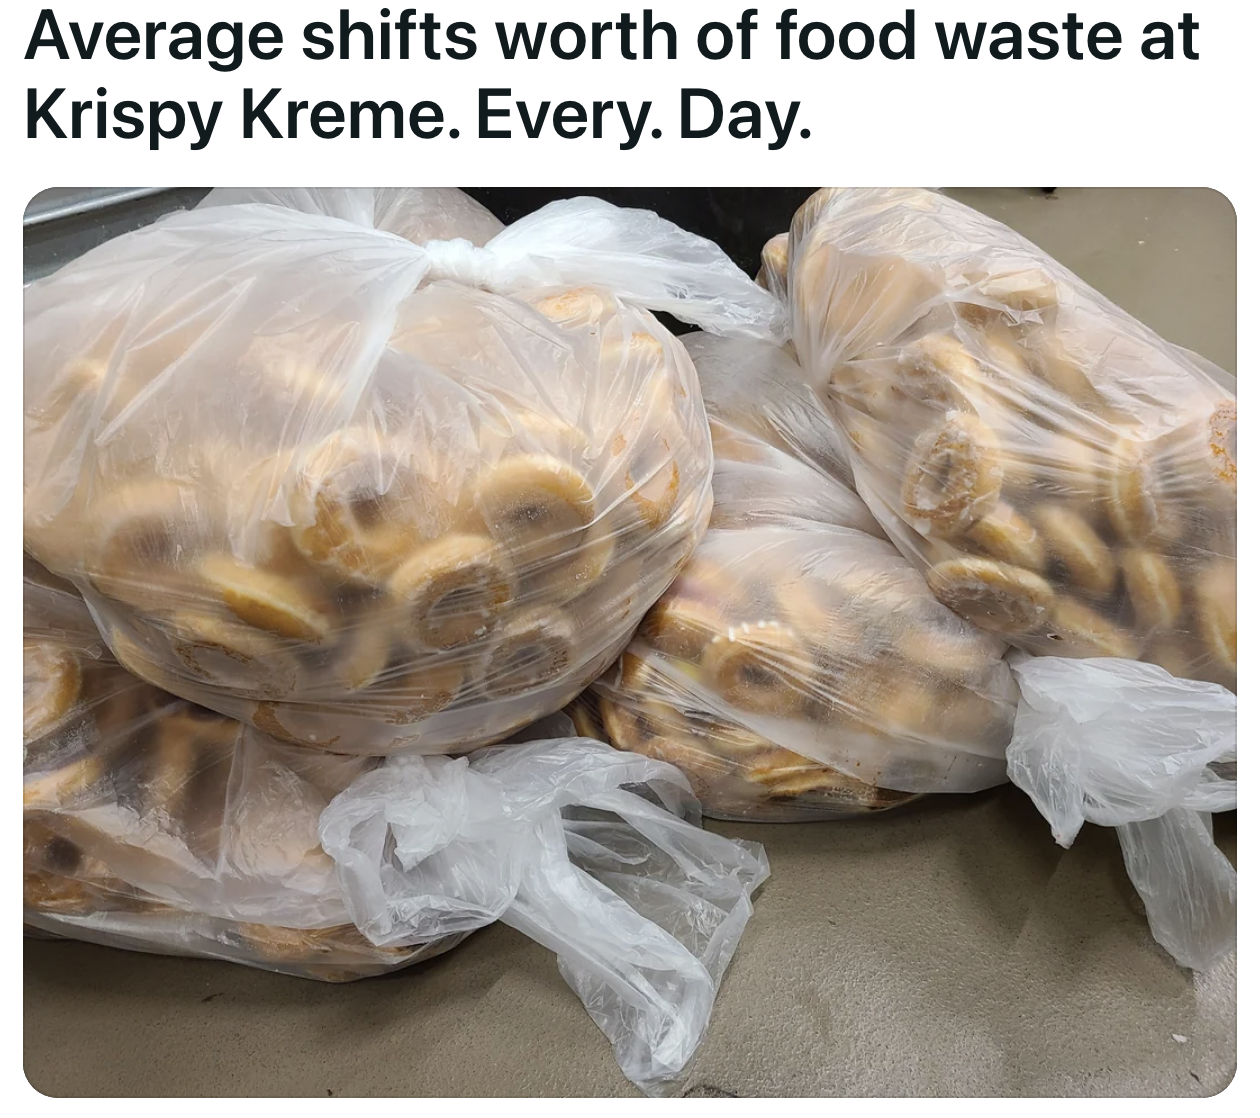 Four large plastic bags full of donuts, with a caption that says this is what they throw away every day after a shift at Krispy Kreme